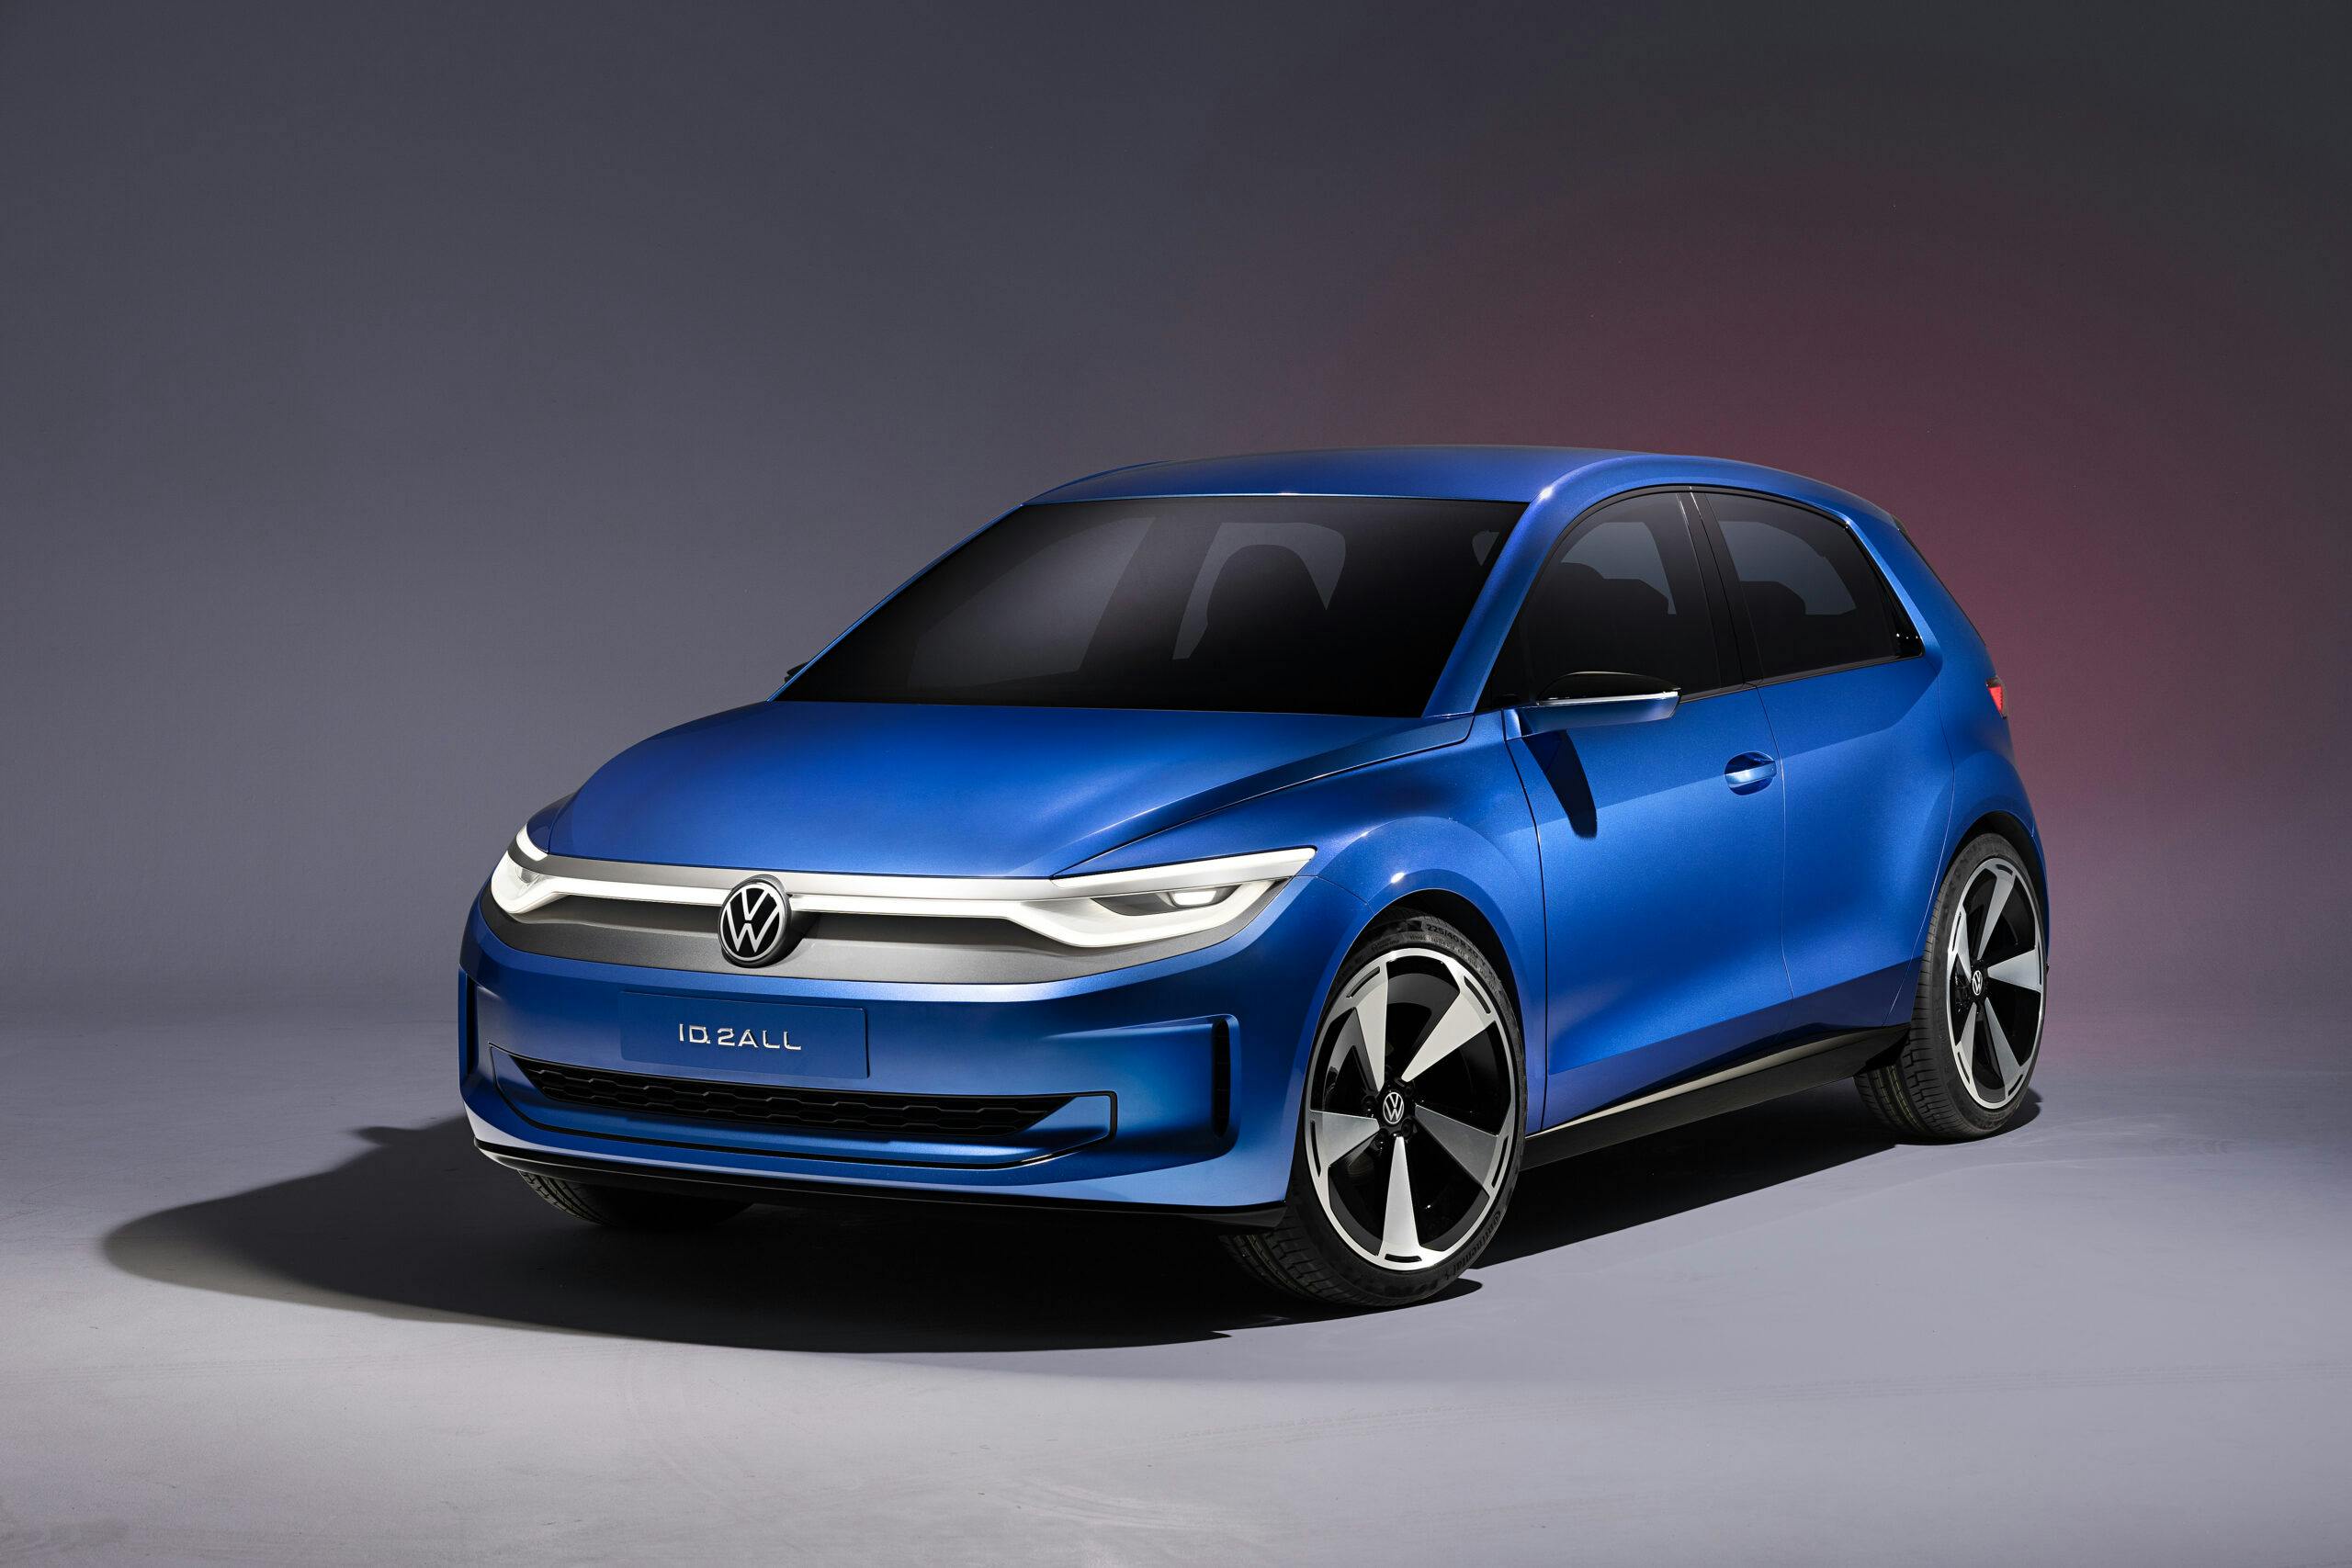 VW-ID2all-concept front